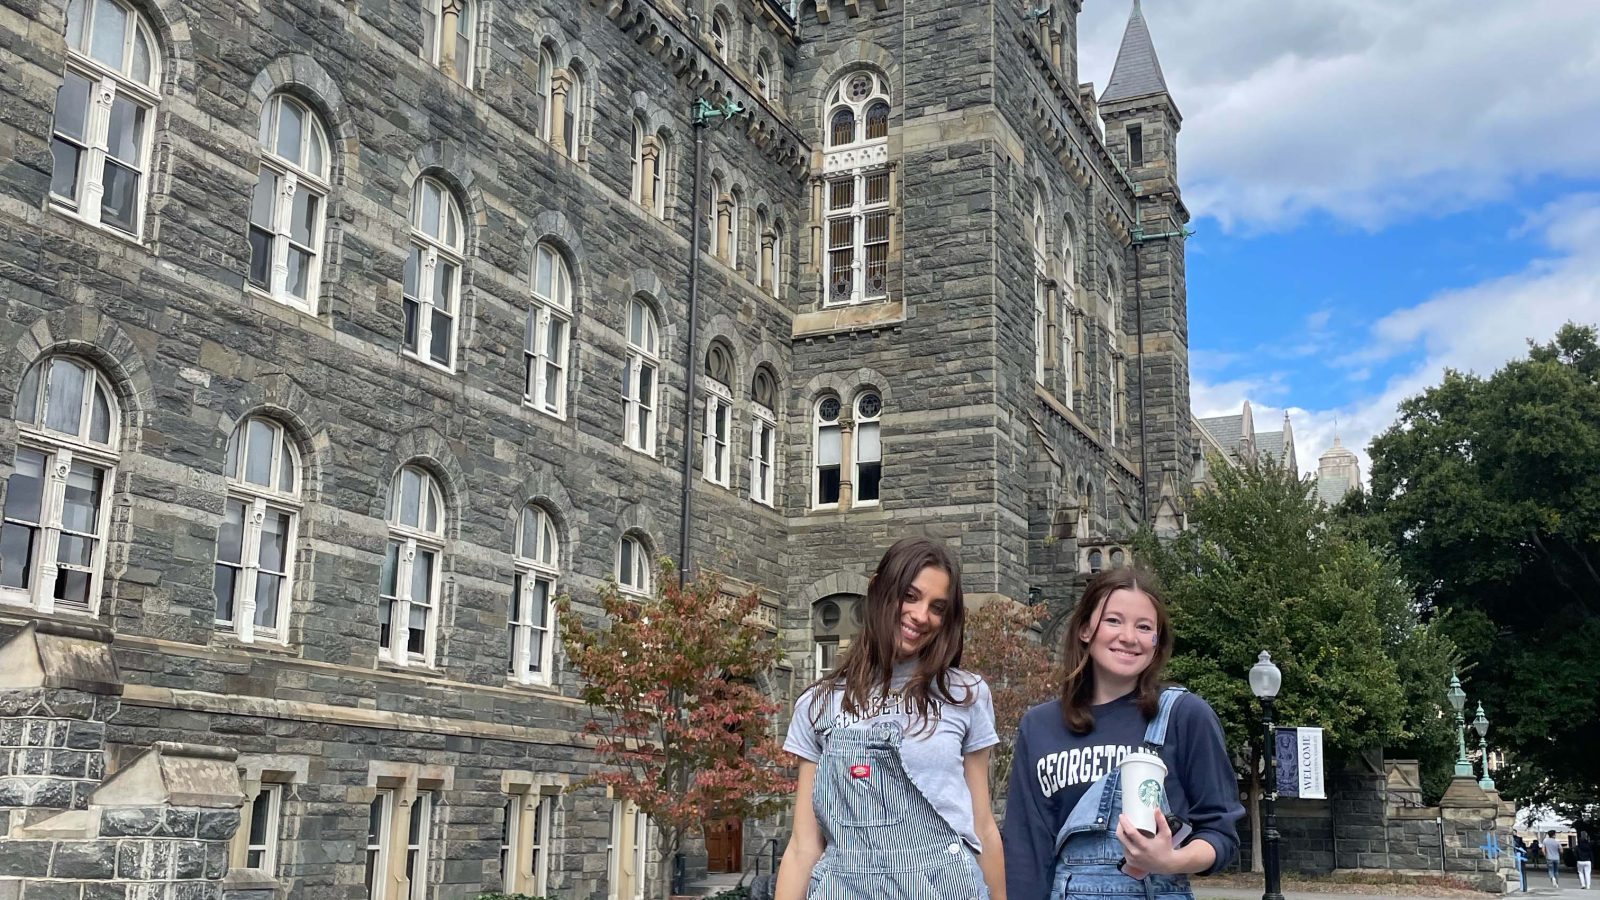 Ava and a friend stroll hand in hand in front of Healy hall while in Georgetown attire